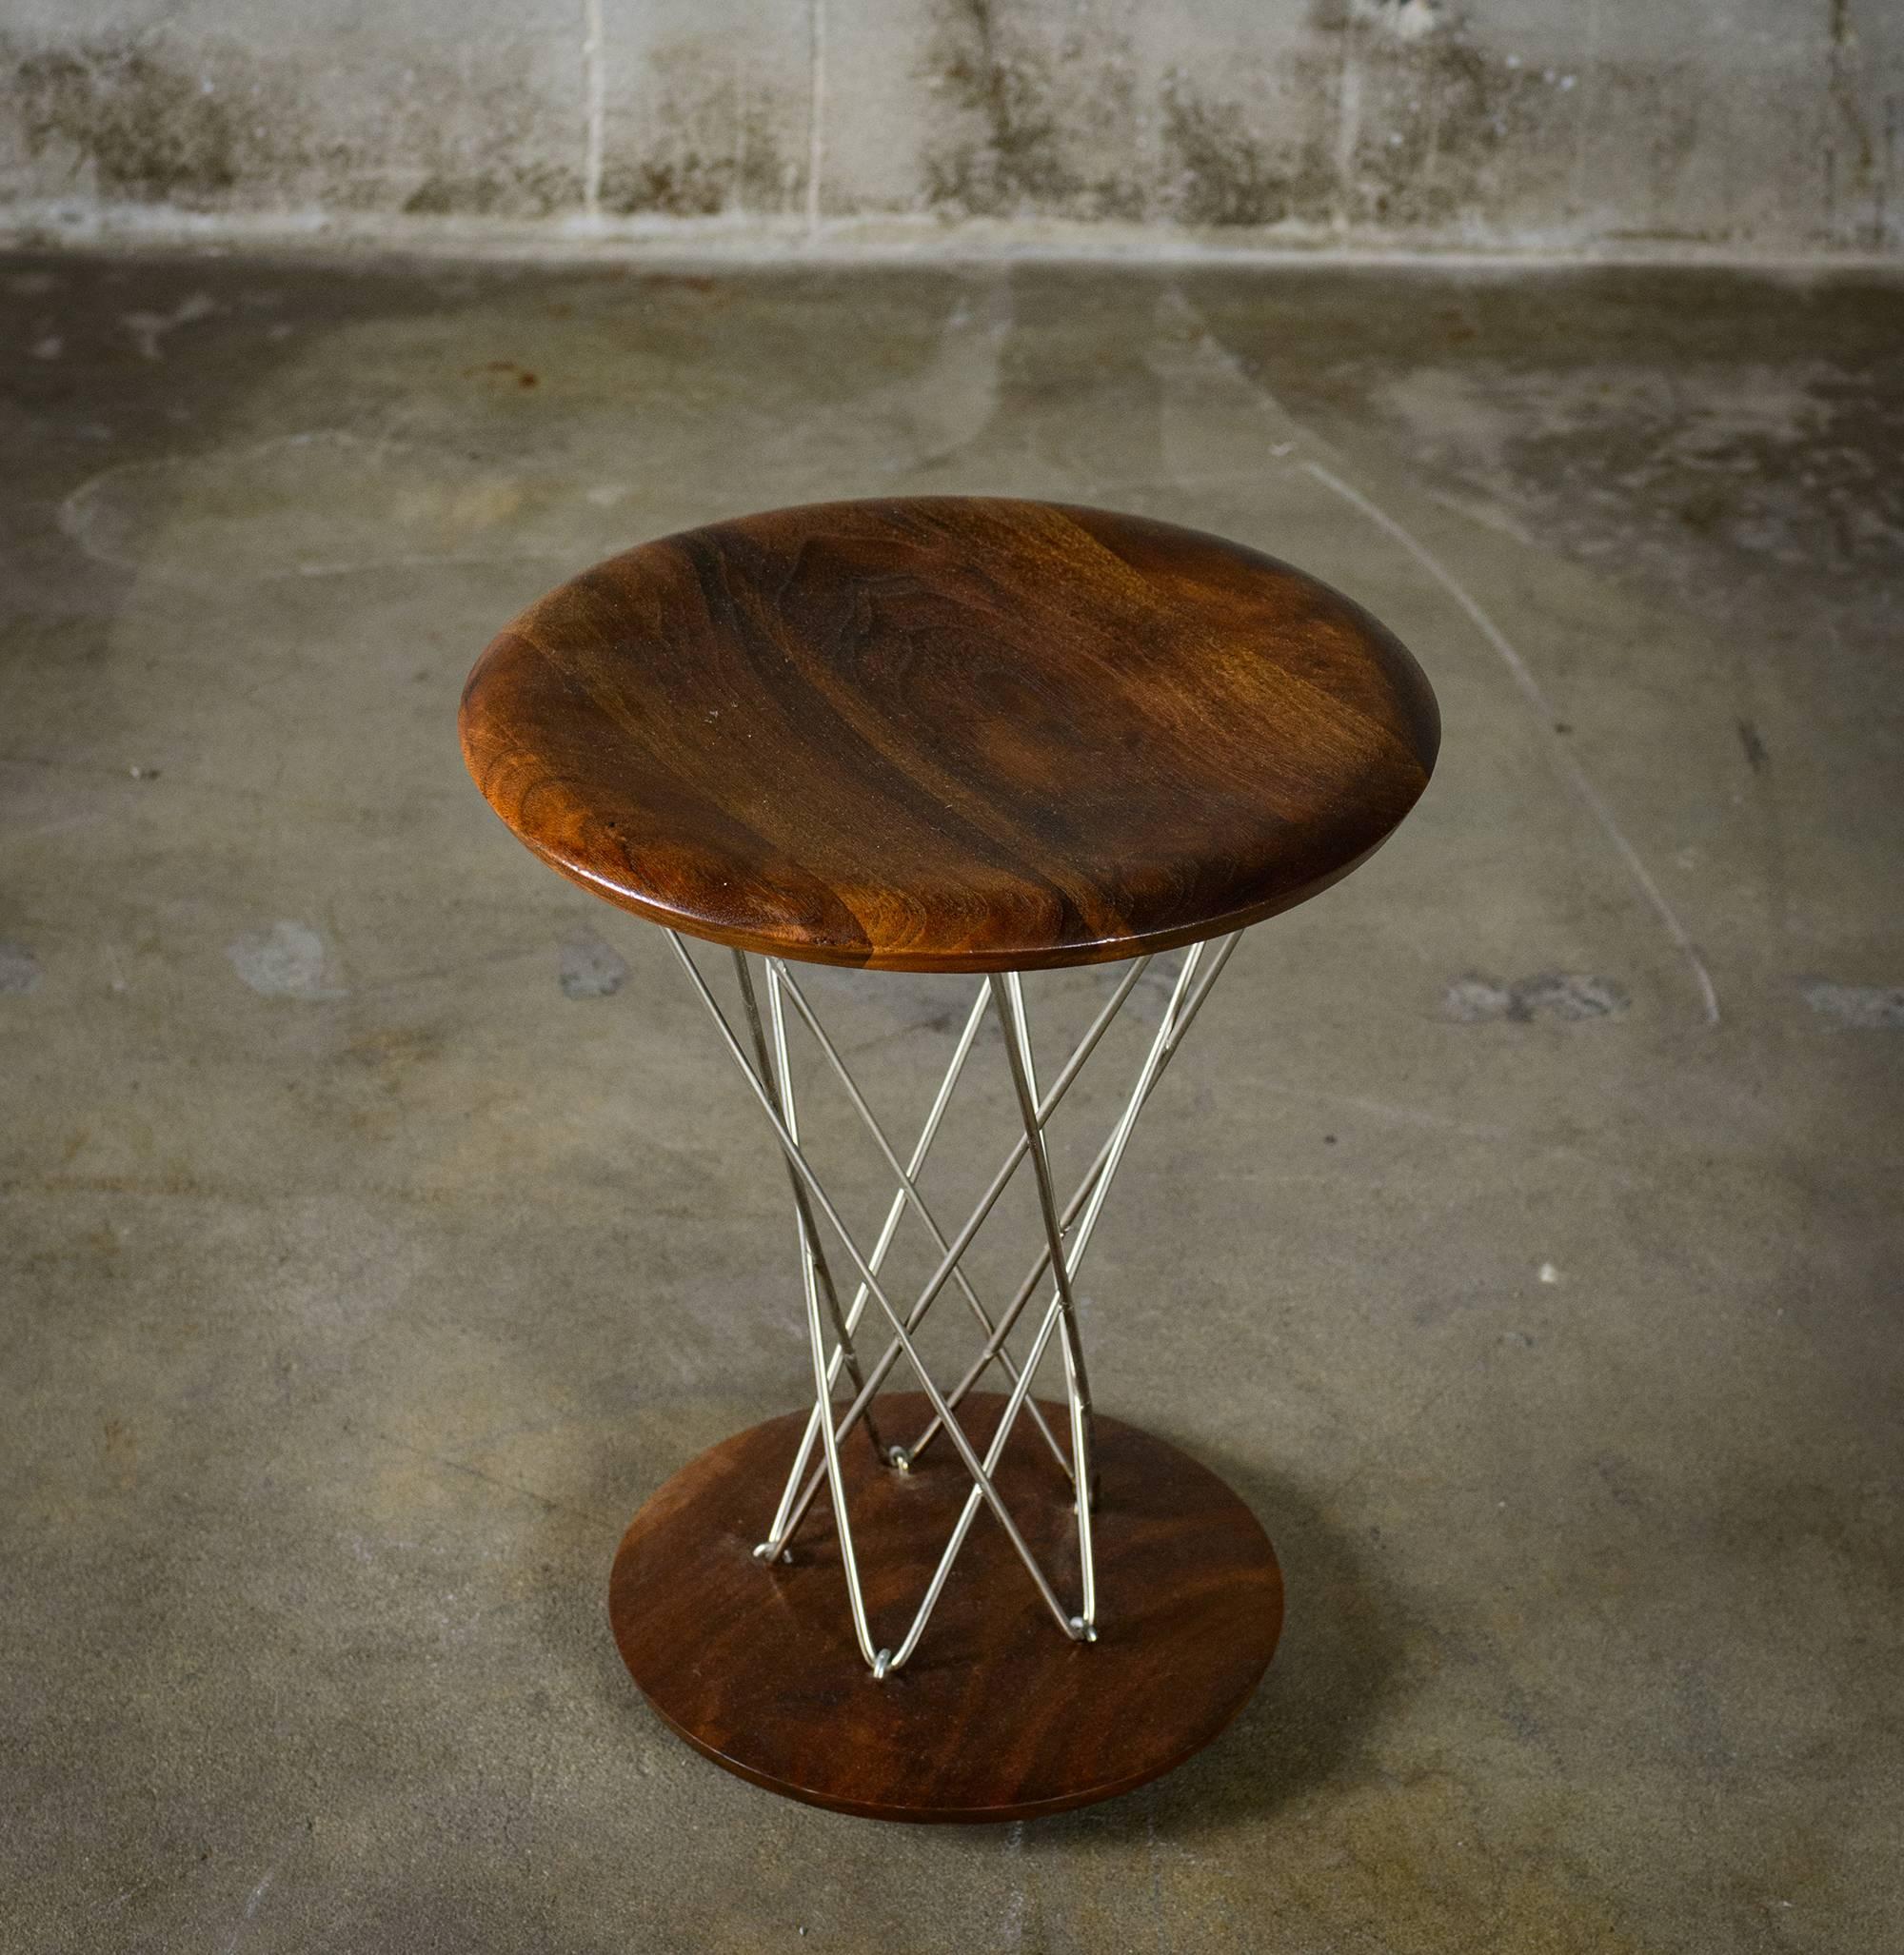 Rocking stool designed by Isamu Noguchi, manufactured by Knoll Inc. in 1955.